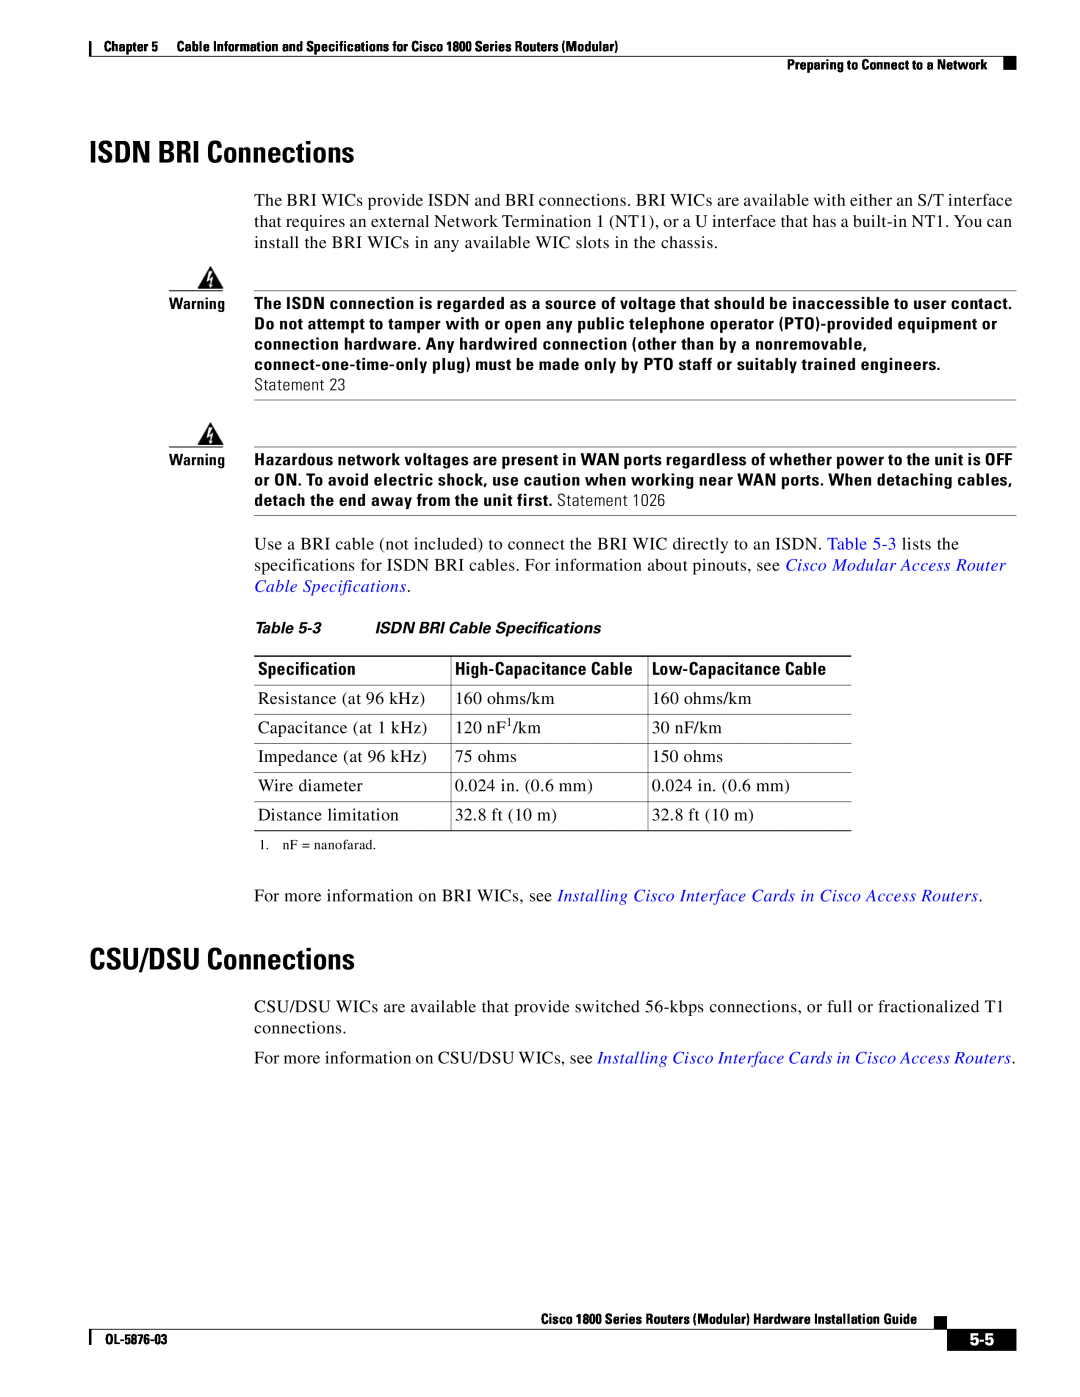 Cisco Systems CISCO1841-HSEC/K9-RF manual ISDN BRI Connections, CSU/DSU Connections, High-Capacitance Cable 